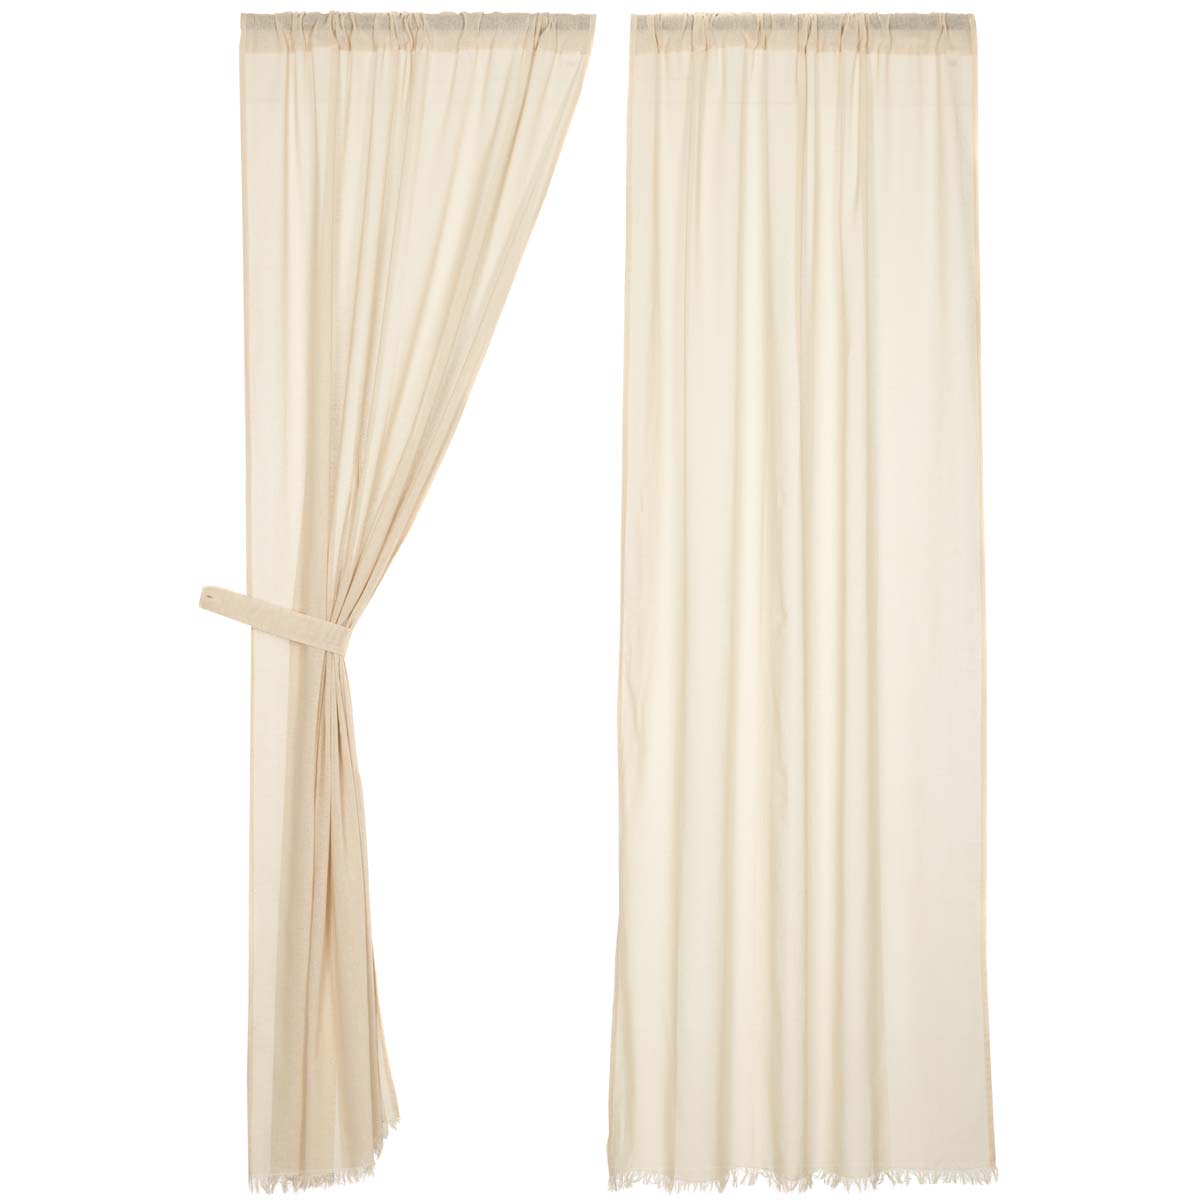 April & Olive Tobacco Cloth Natural Panel Fringed Set of 2 84x40 By VHC Brands